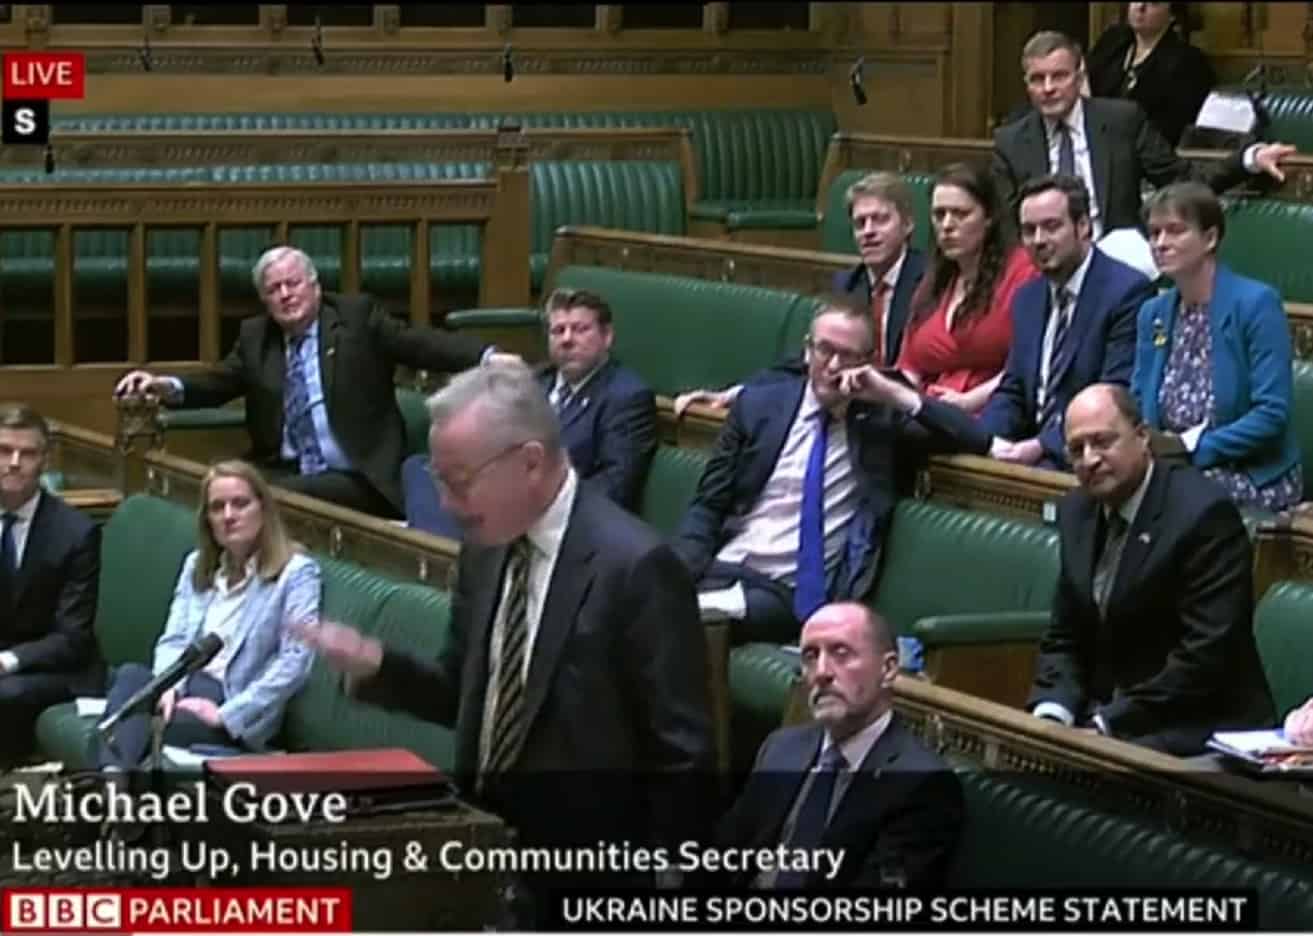 Watch: Michael Gove loses his cool in parliament over hostile environment accusations